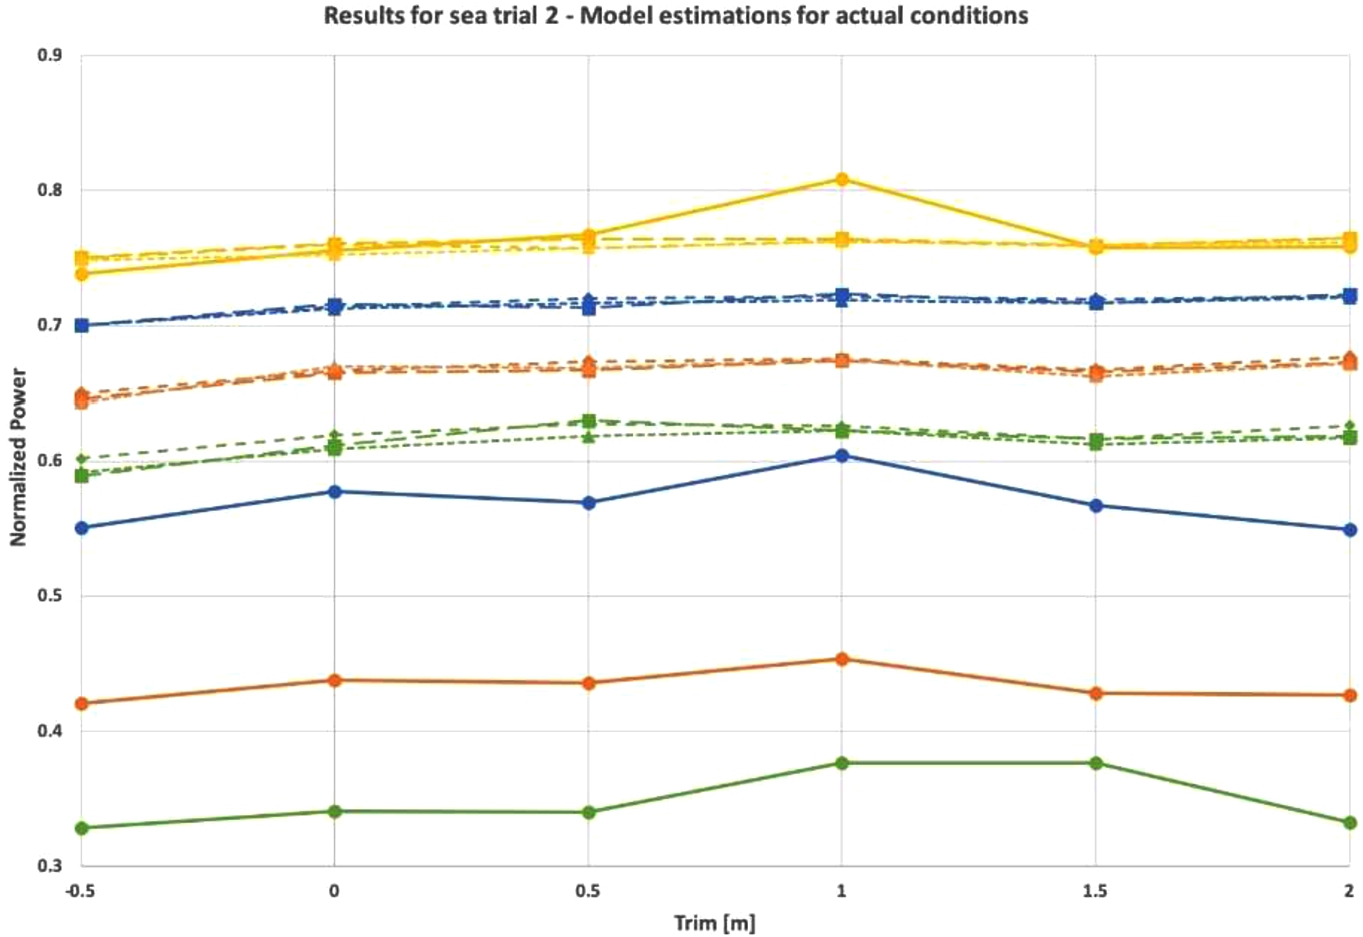 Model- and sea trial results of the second sea trial in ballast load condition. Model input is equal to the actual sea trial conditions.